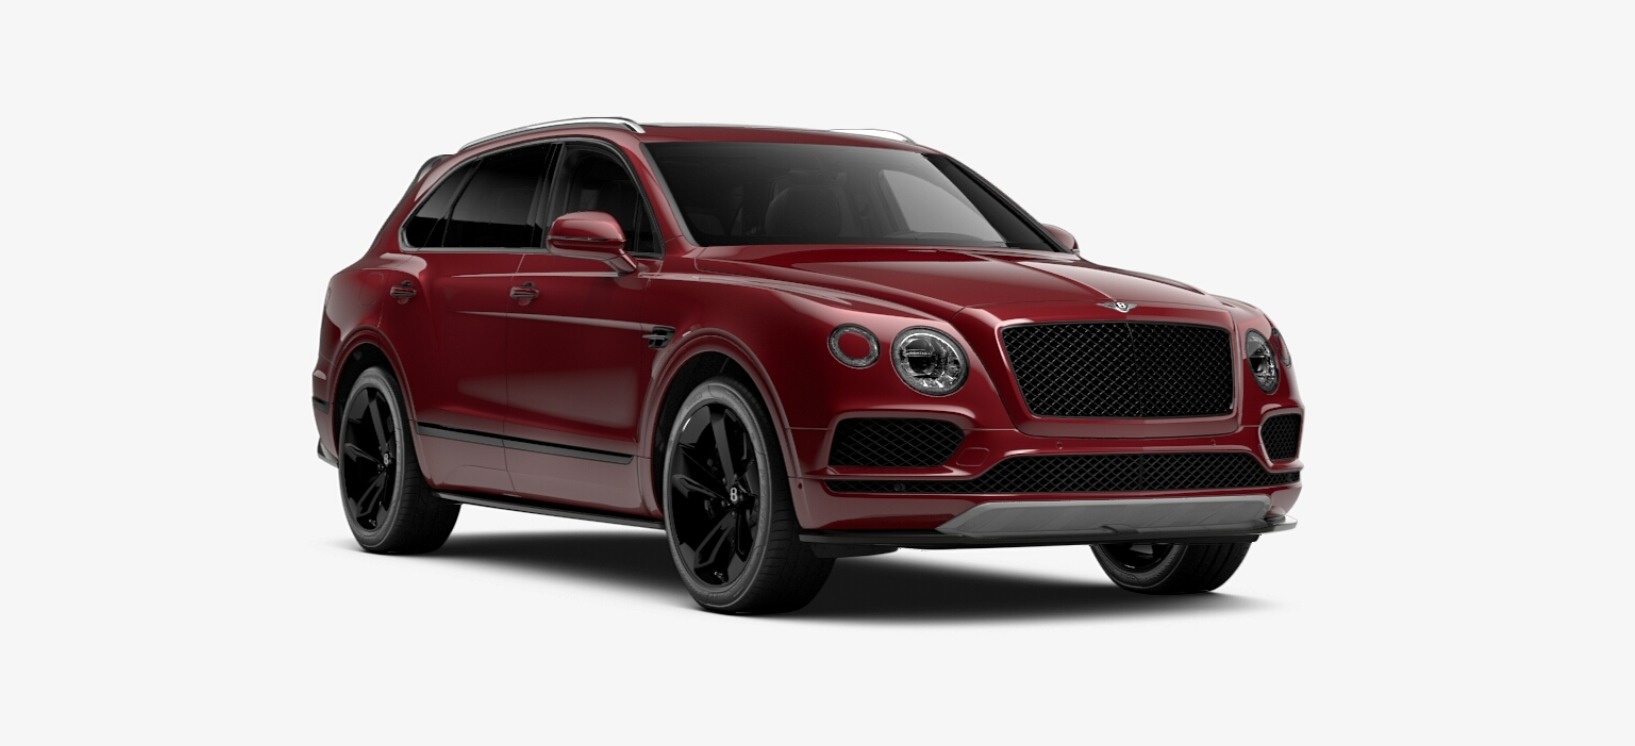 New 2018 Bentley Bentayga Black Edition for sale Sold at Pagani of Greenwich in Greenwich CT 06830 1